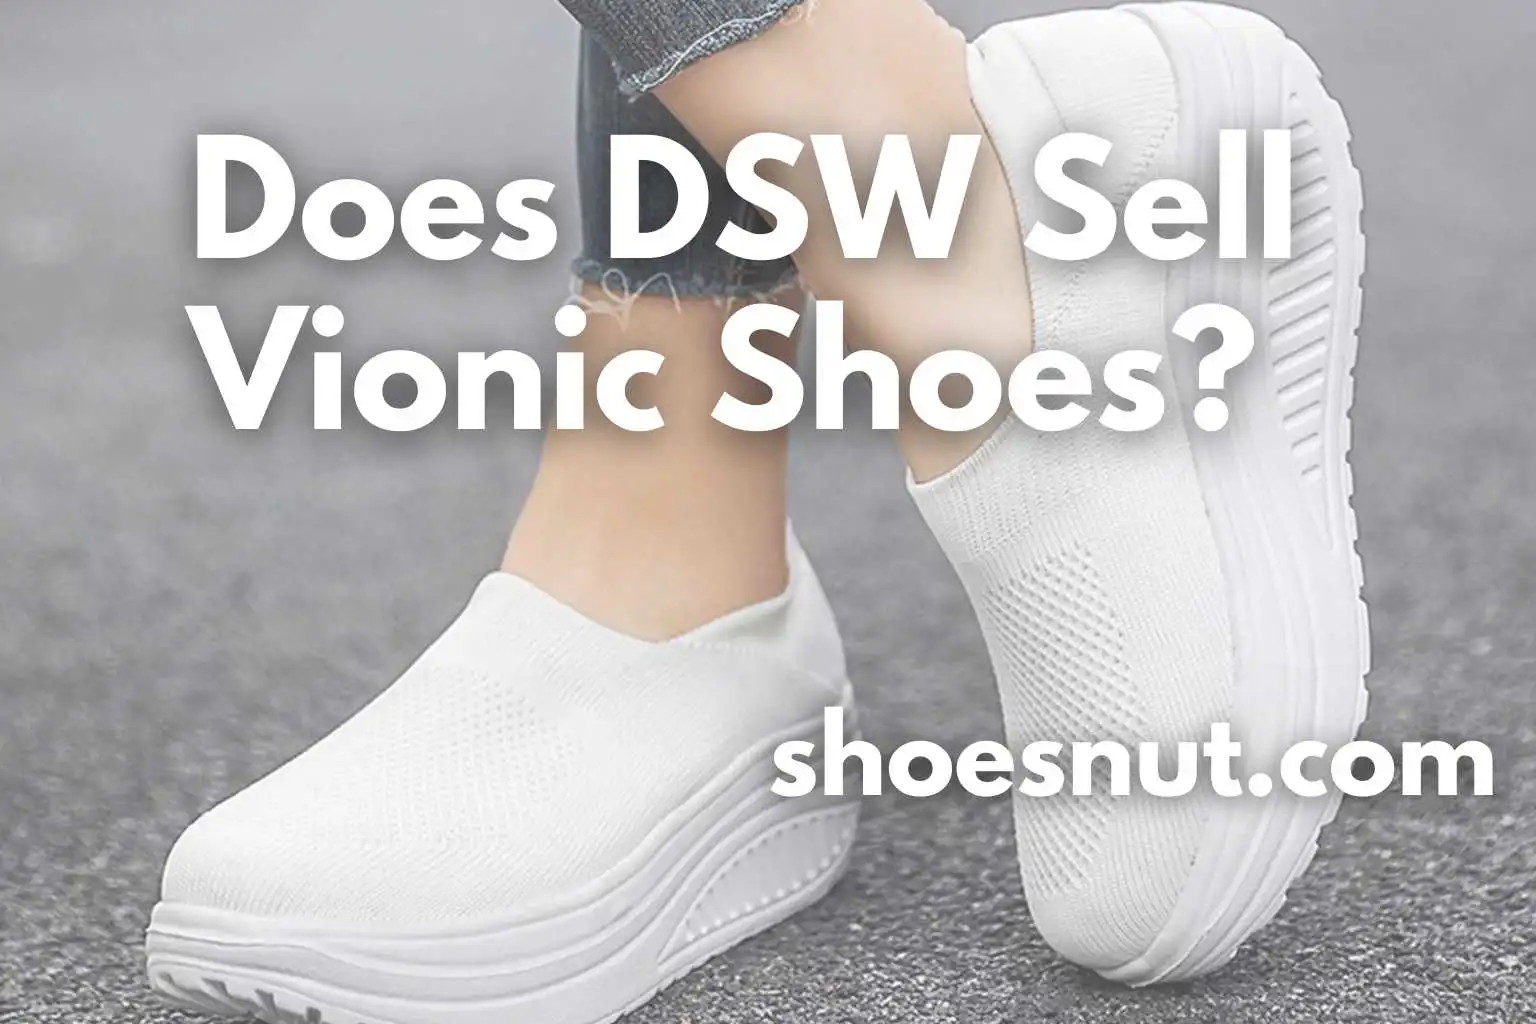 Does DSW Sell Vionic Shoes?